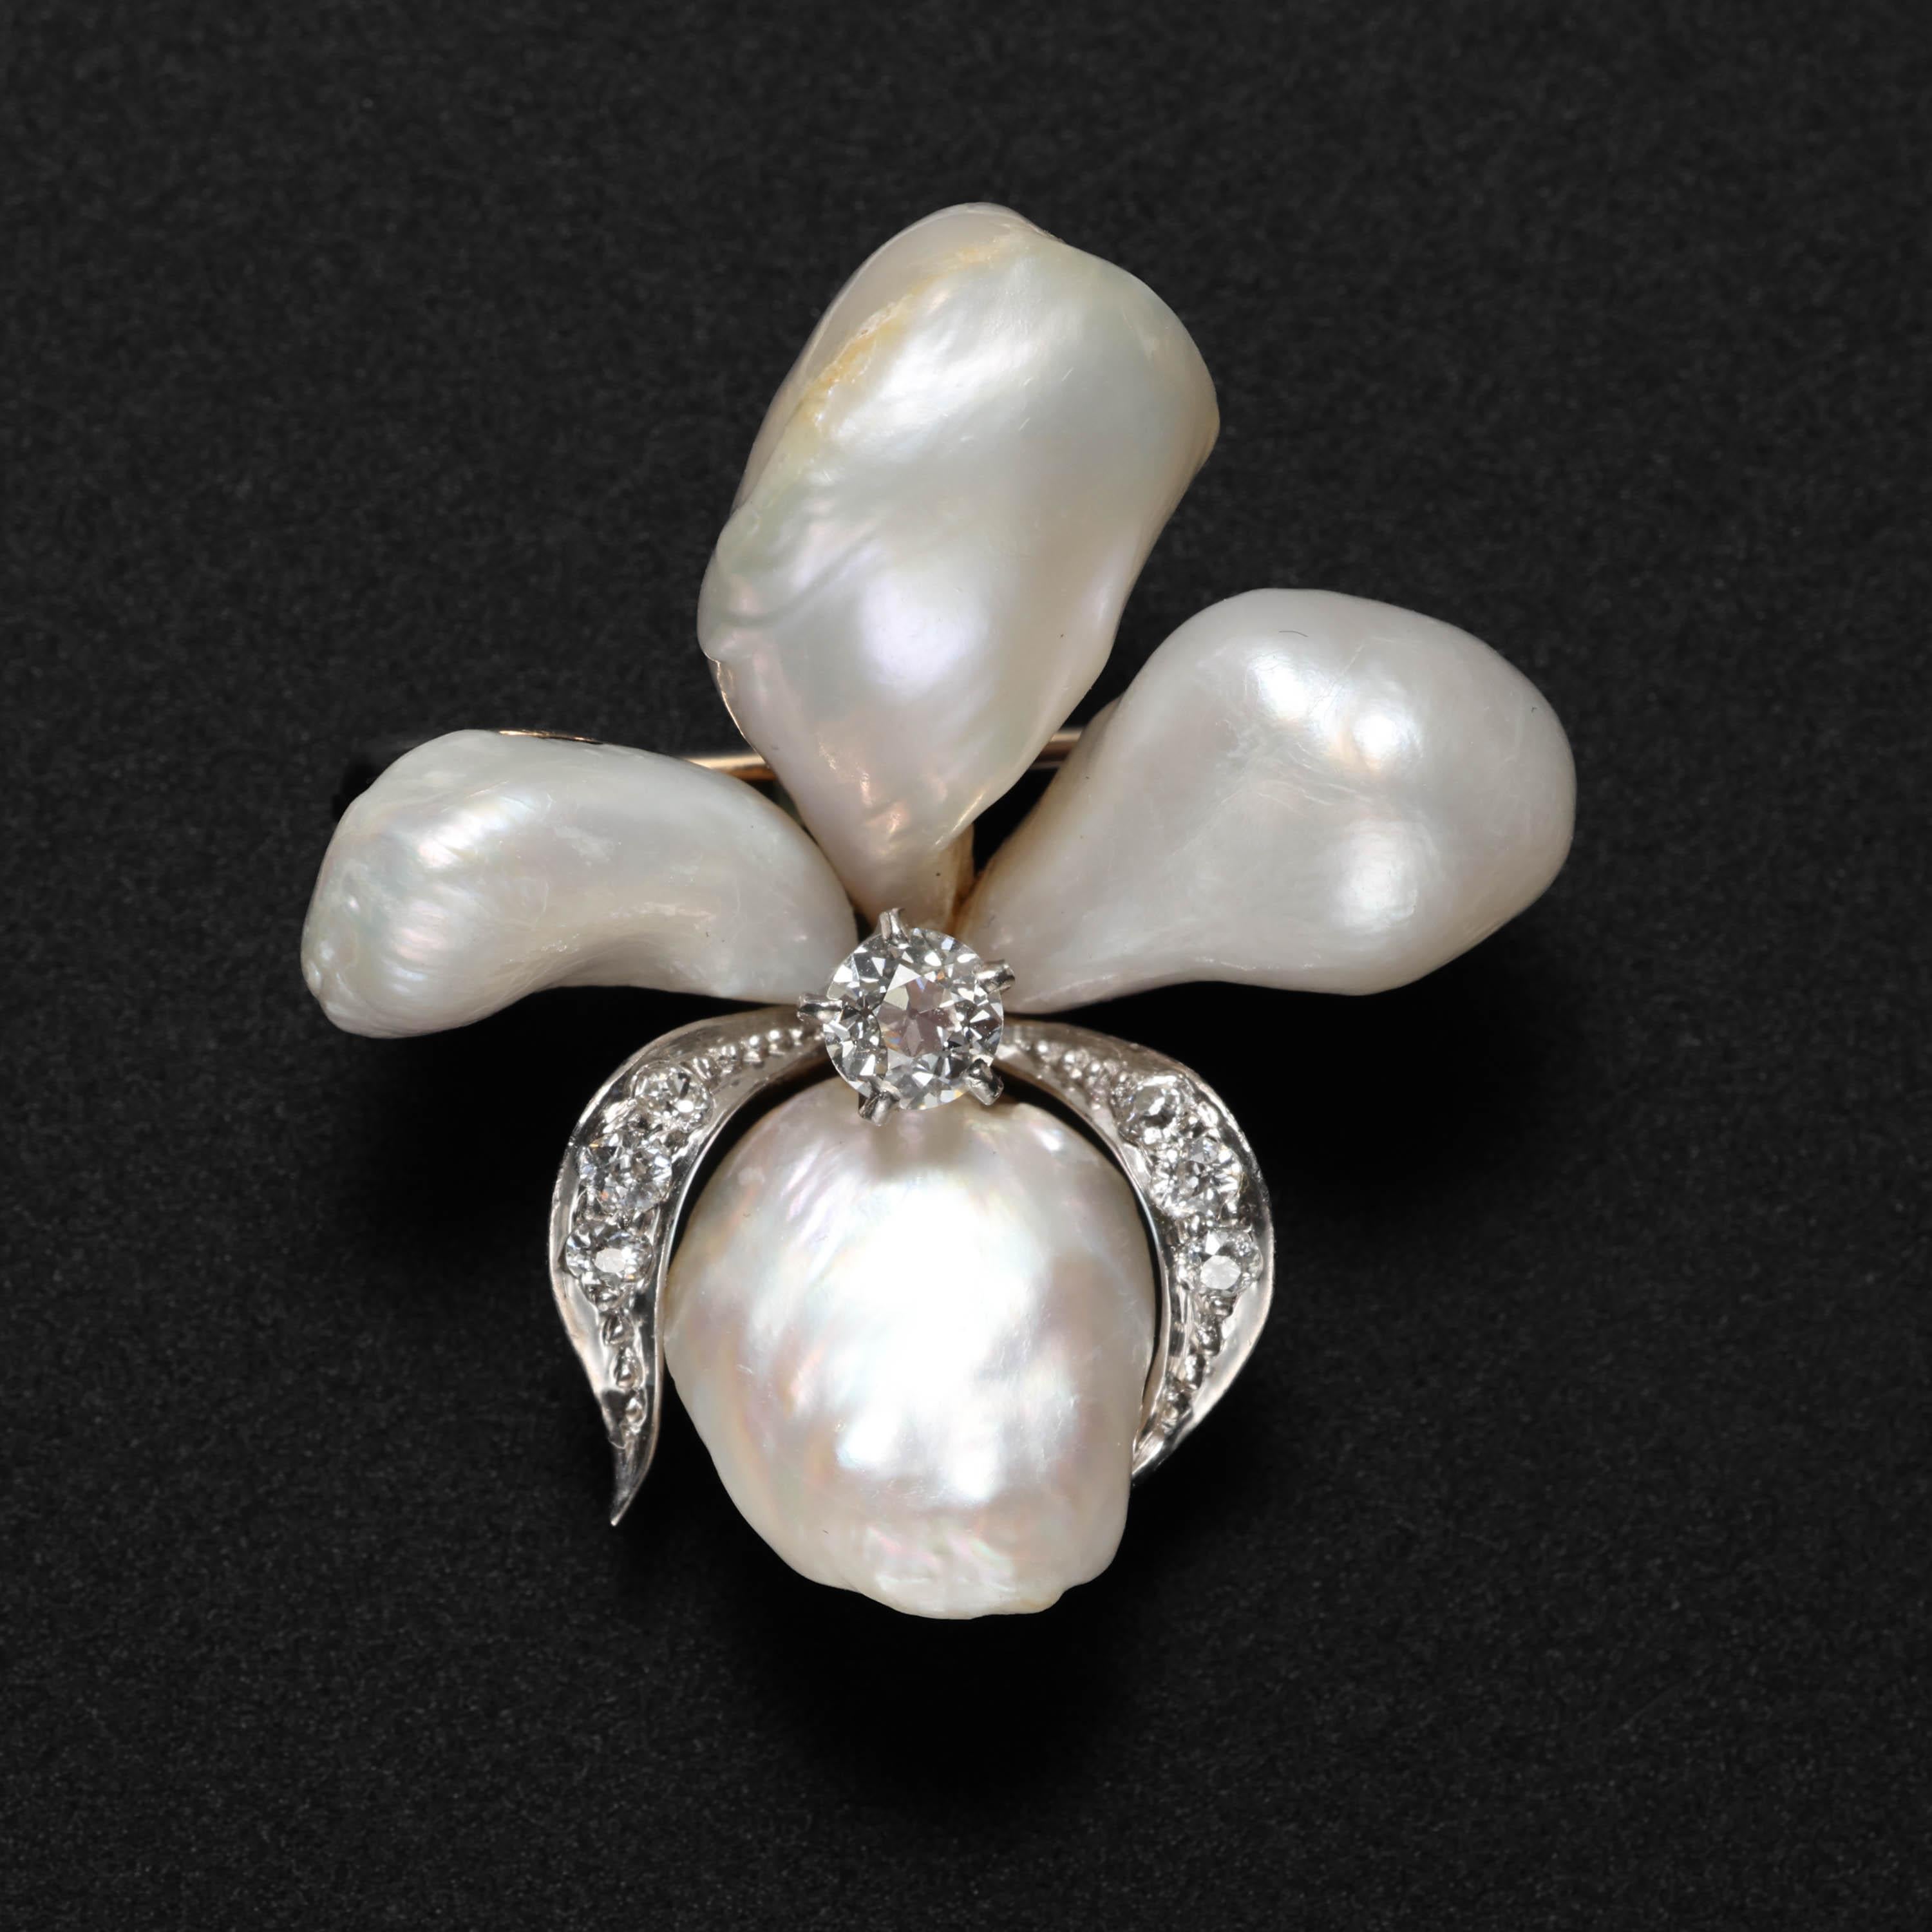 Four baroque natural, uncultured river pearls -gleaming and iridescent- together resemble with stunning accuracy an iris flower; a design further emphasized by the central .10 carat European diamond and the two platinum 